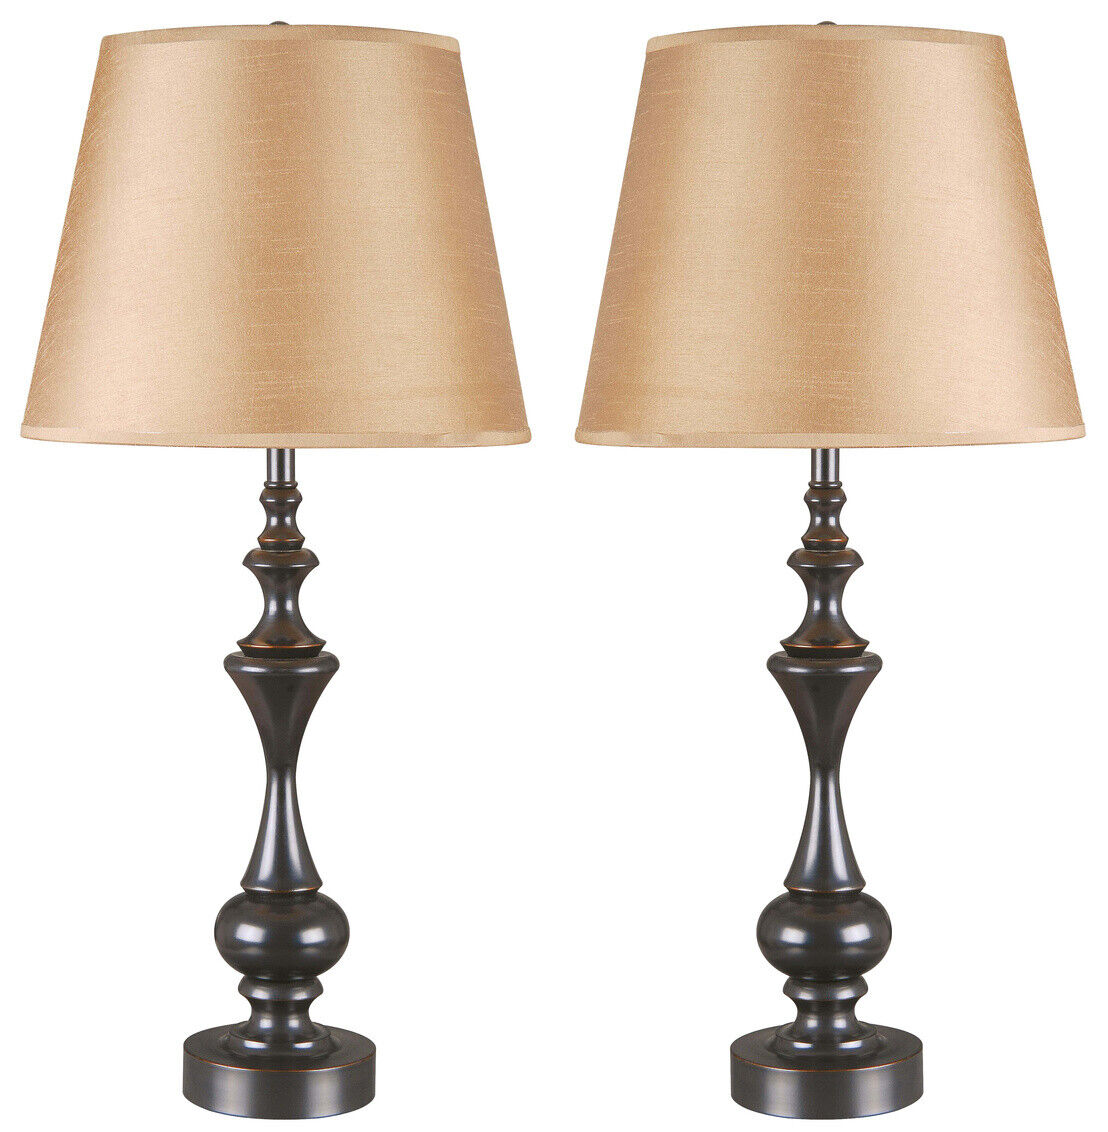 Kenroy Home 32200ORB Stratton Lamp Set - PACK OF 2 LAMPS